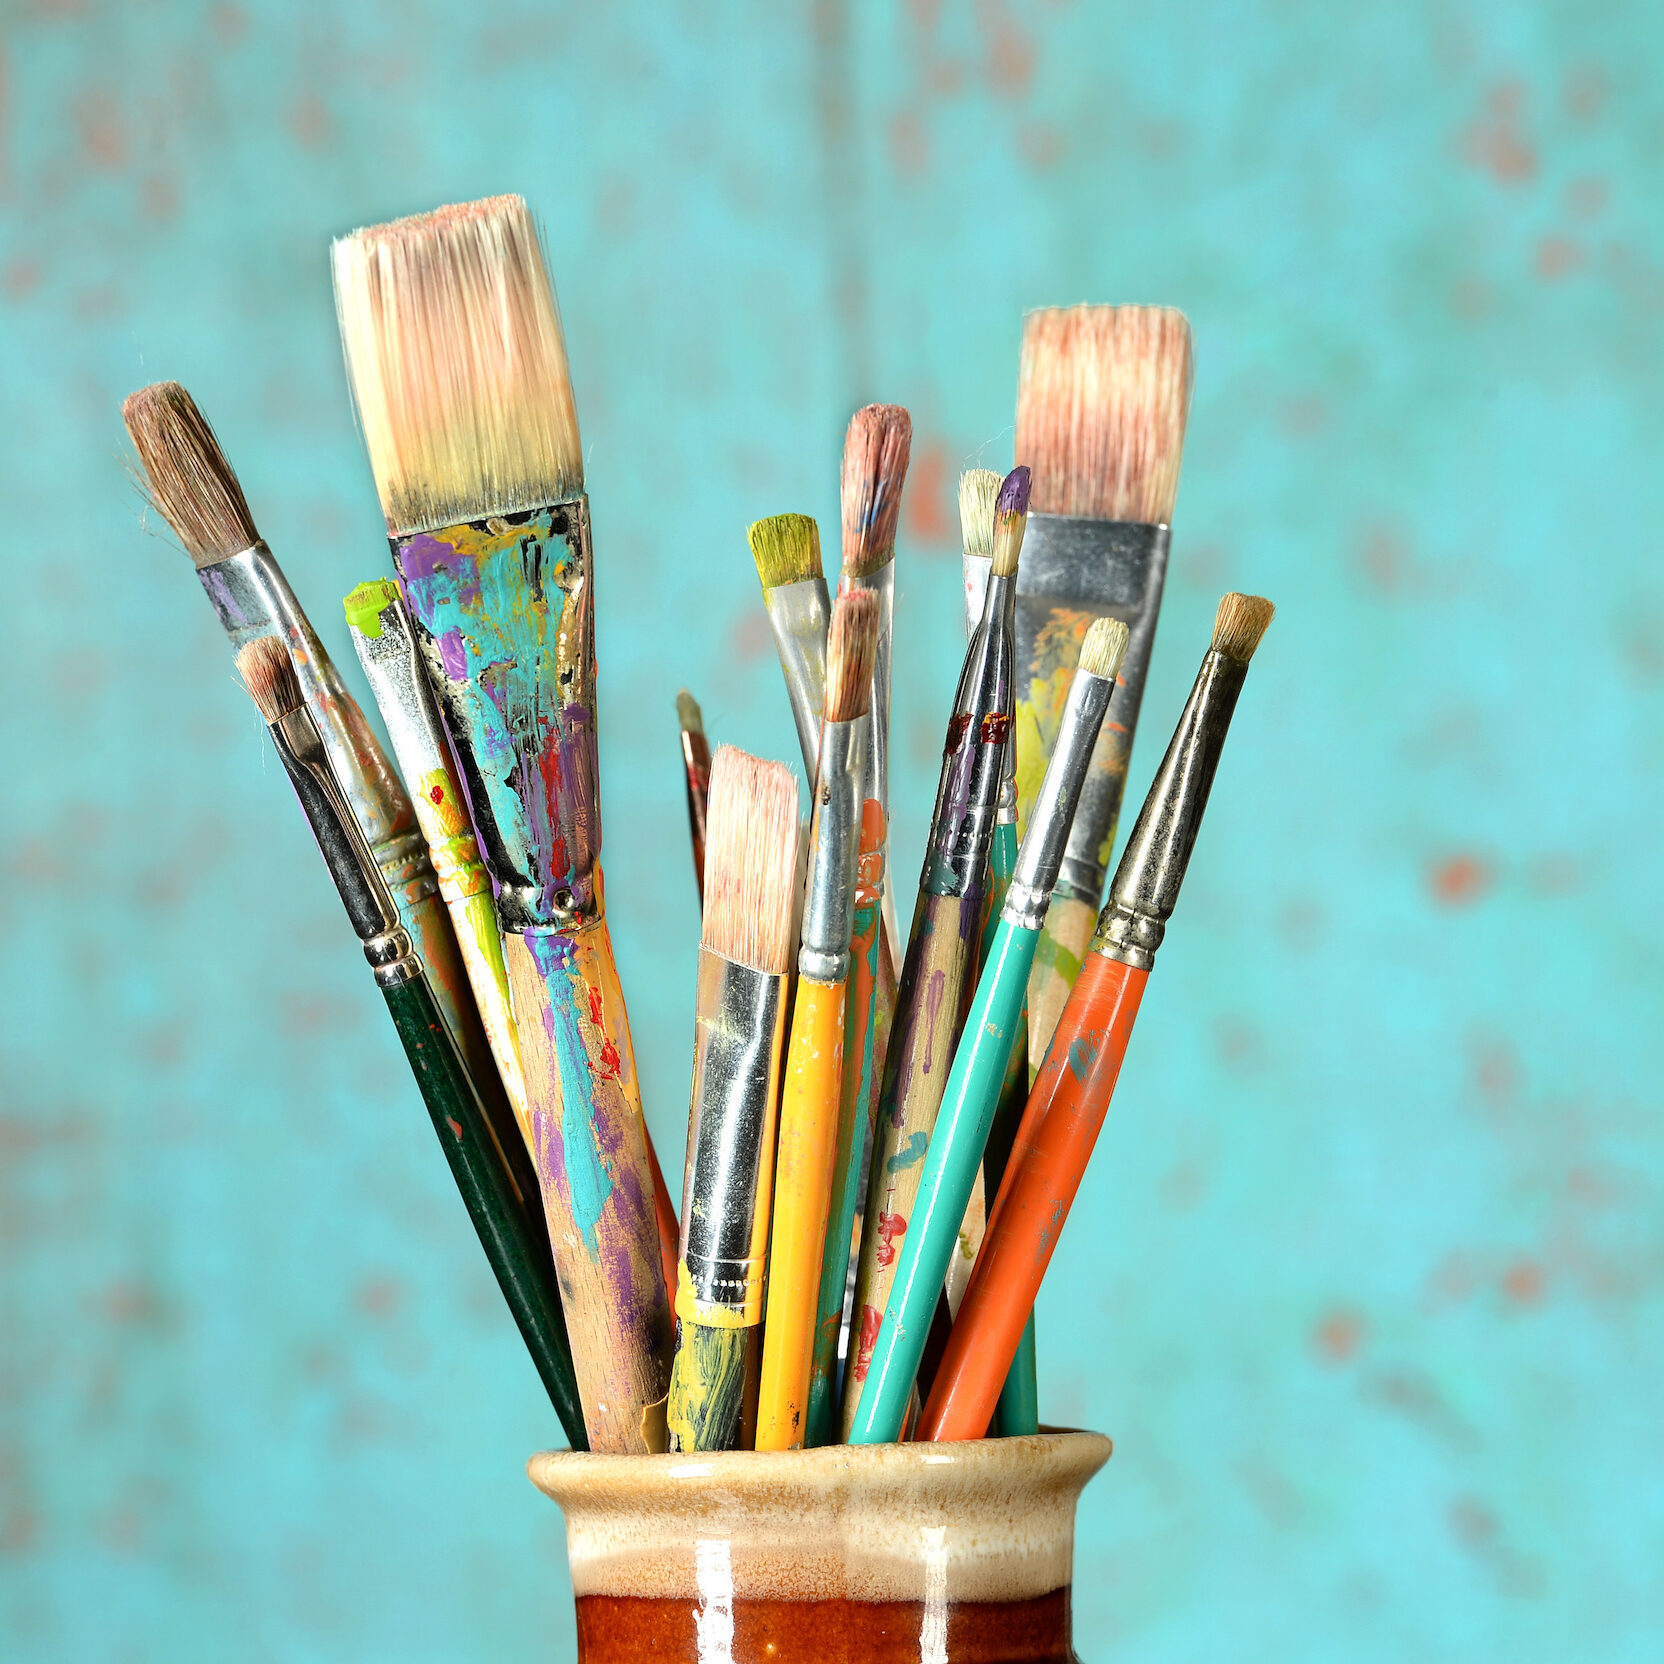 Artist paintbrushes in a jar over colorful background